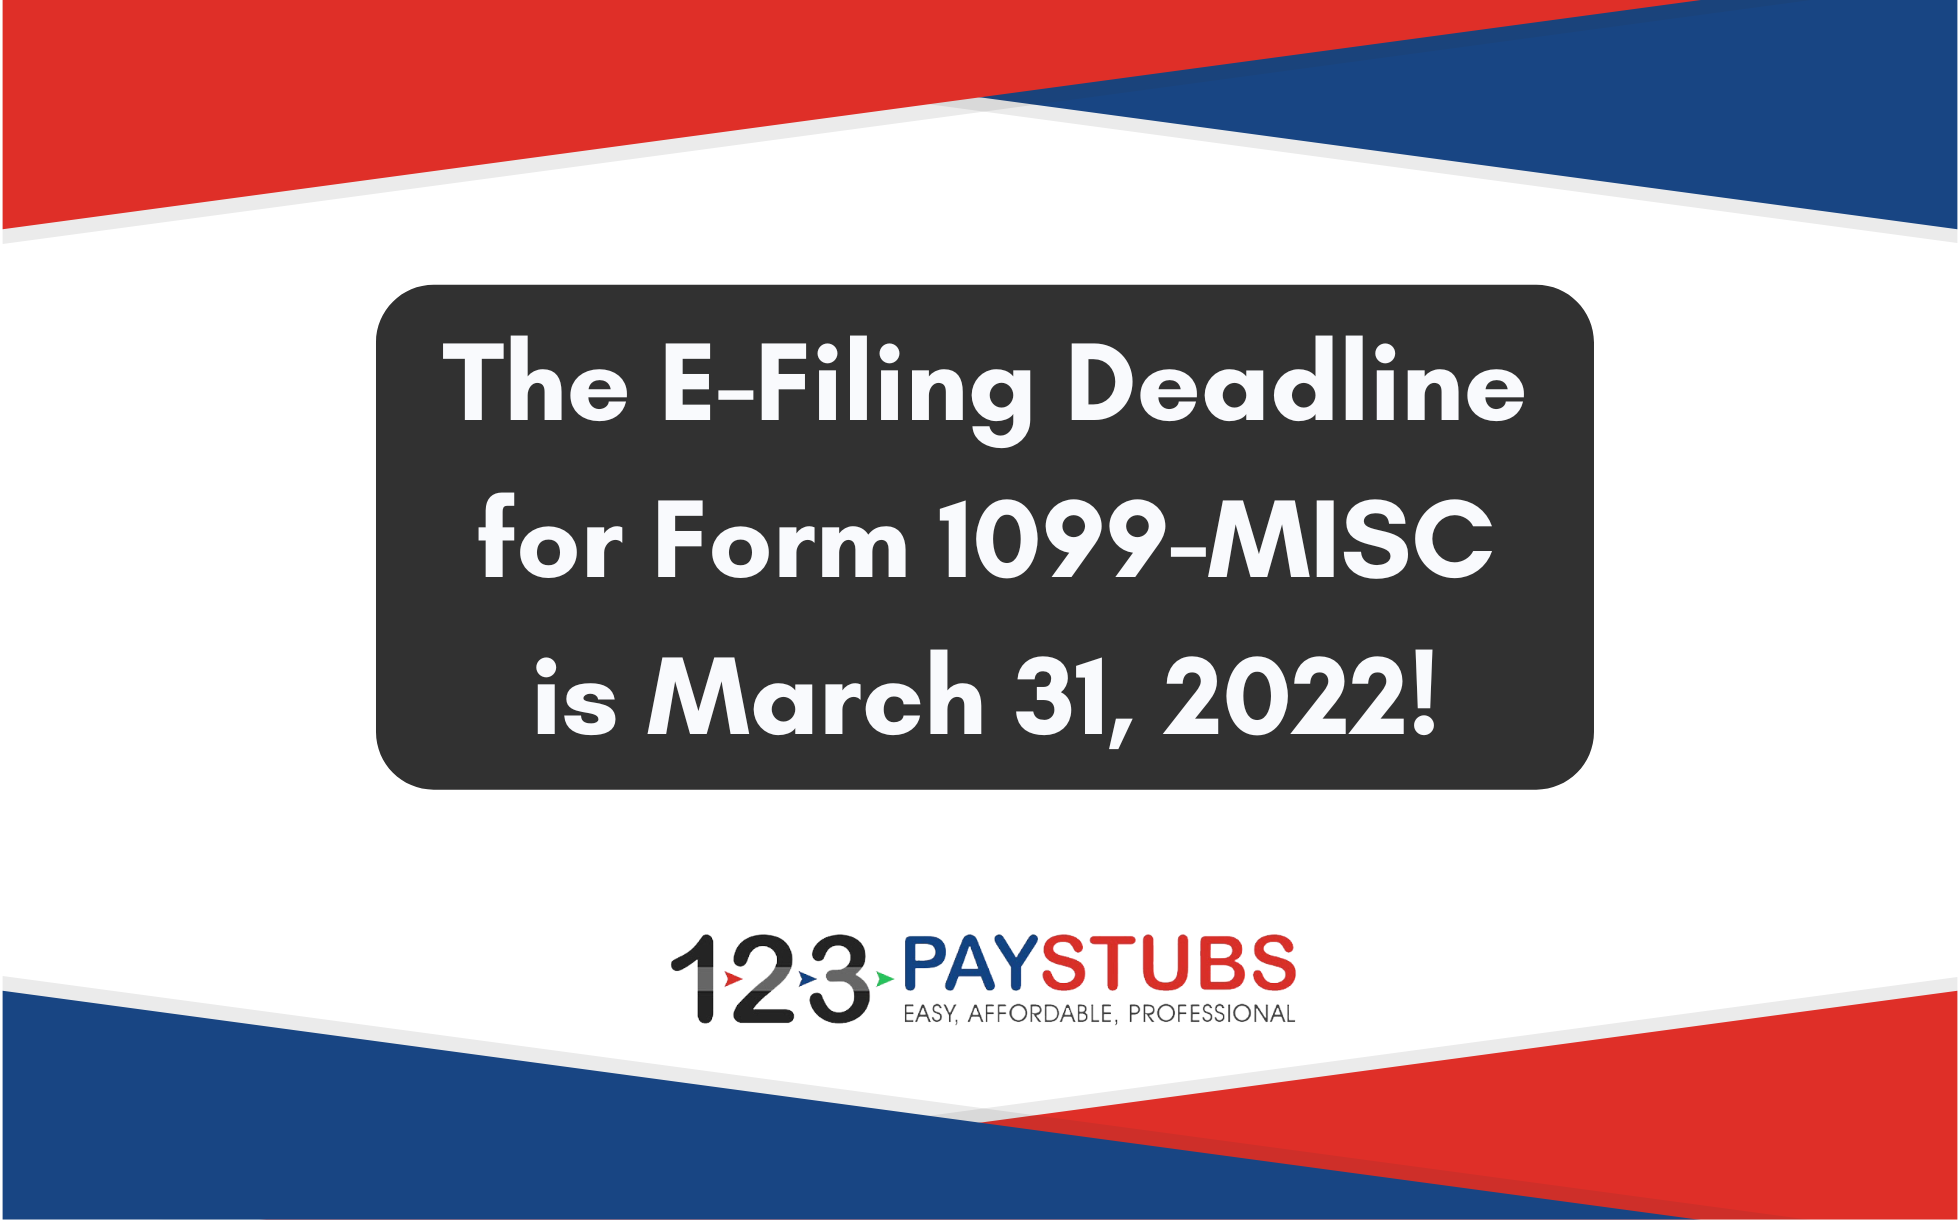 The EFiling Deadline for Form 1099MISC is March 31, 2022